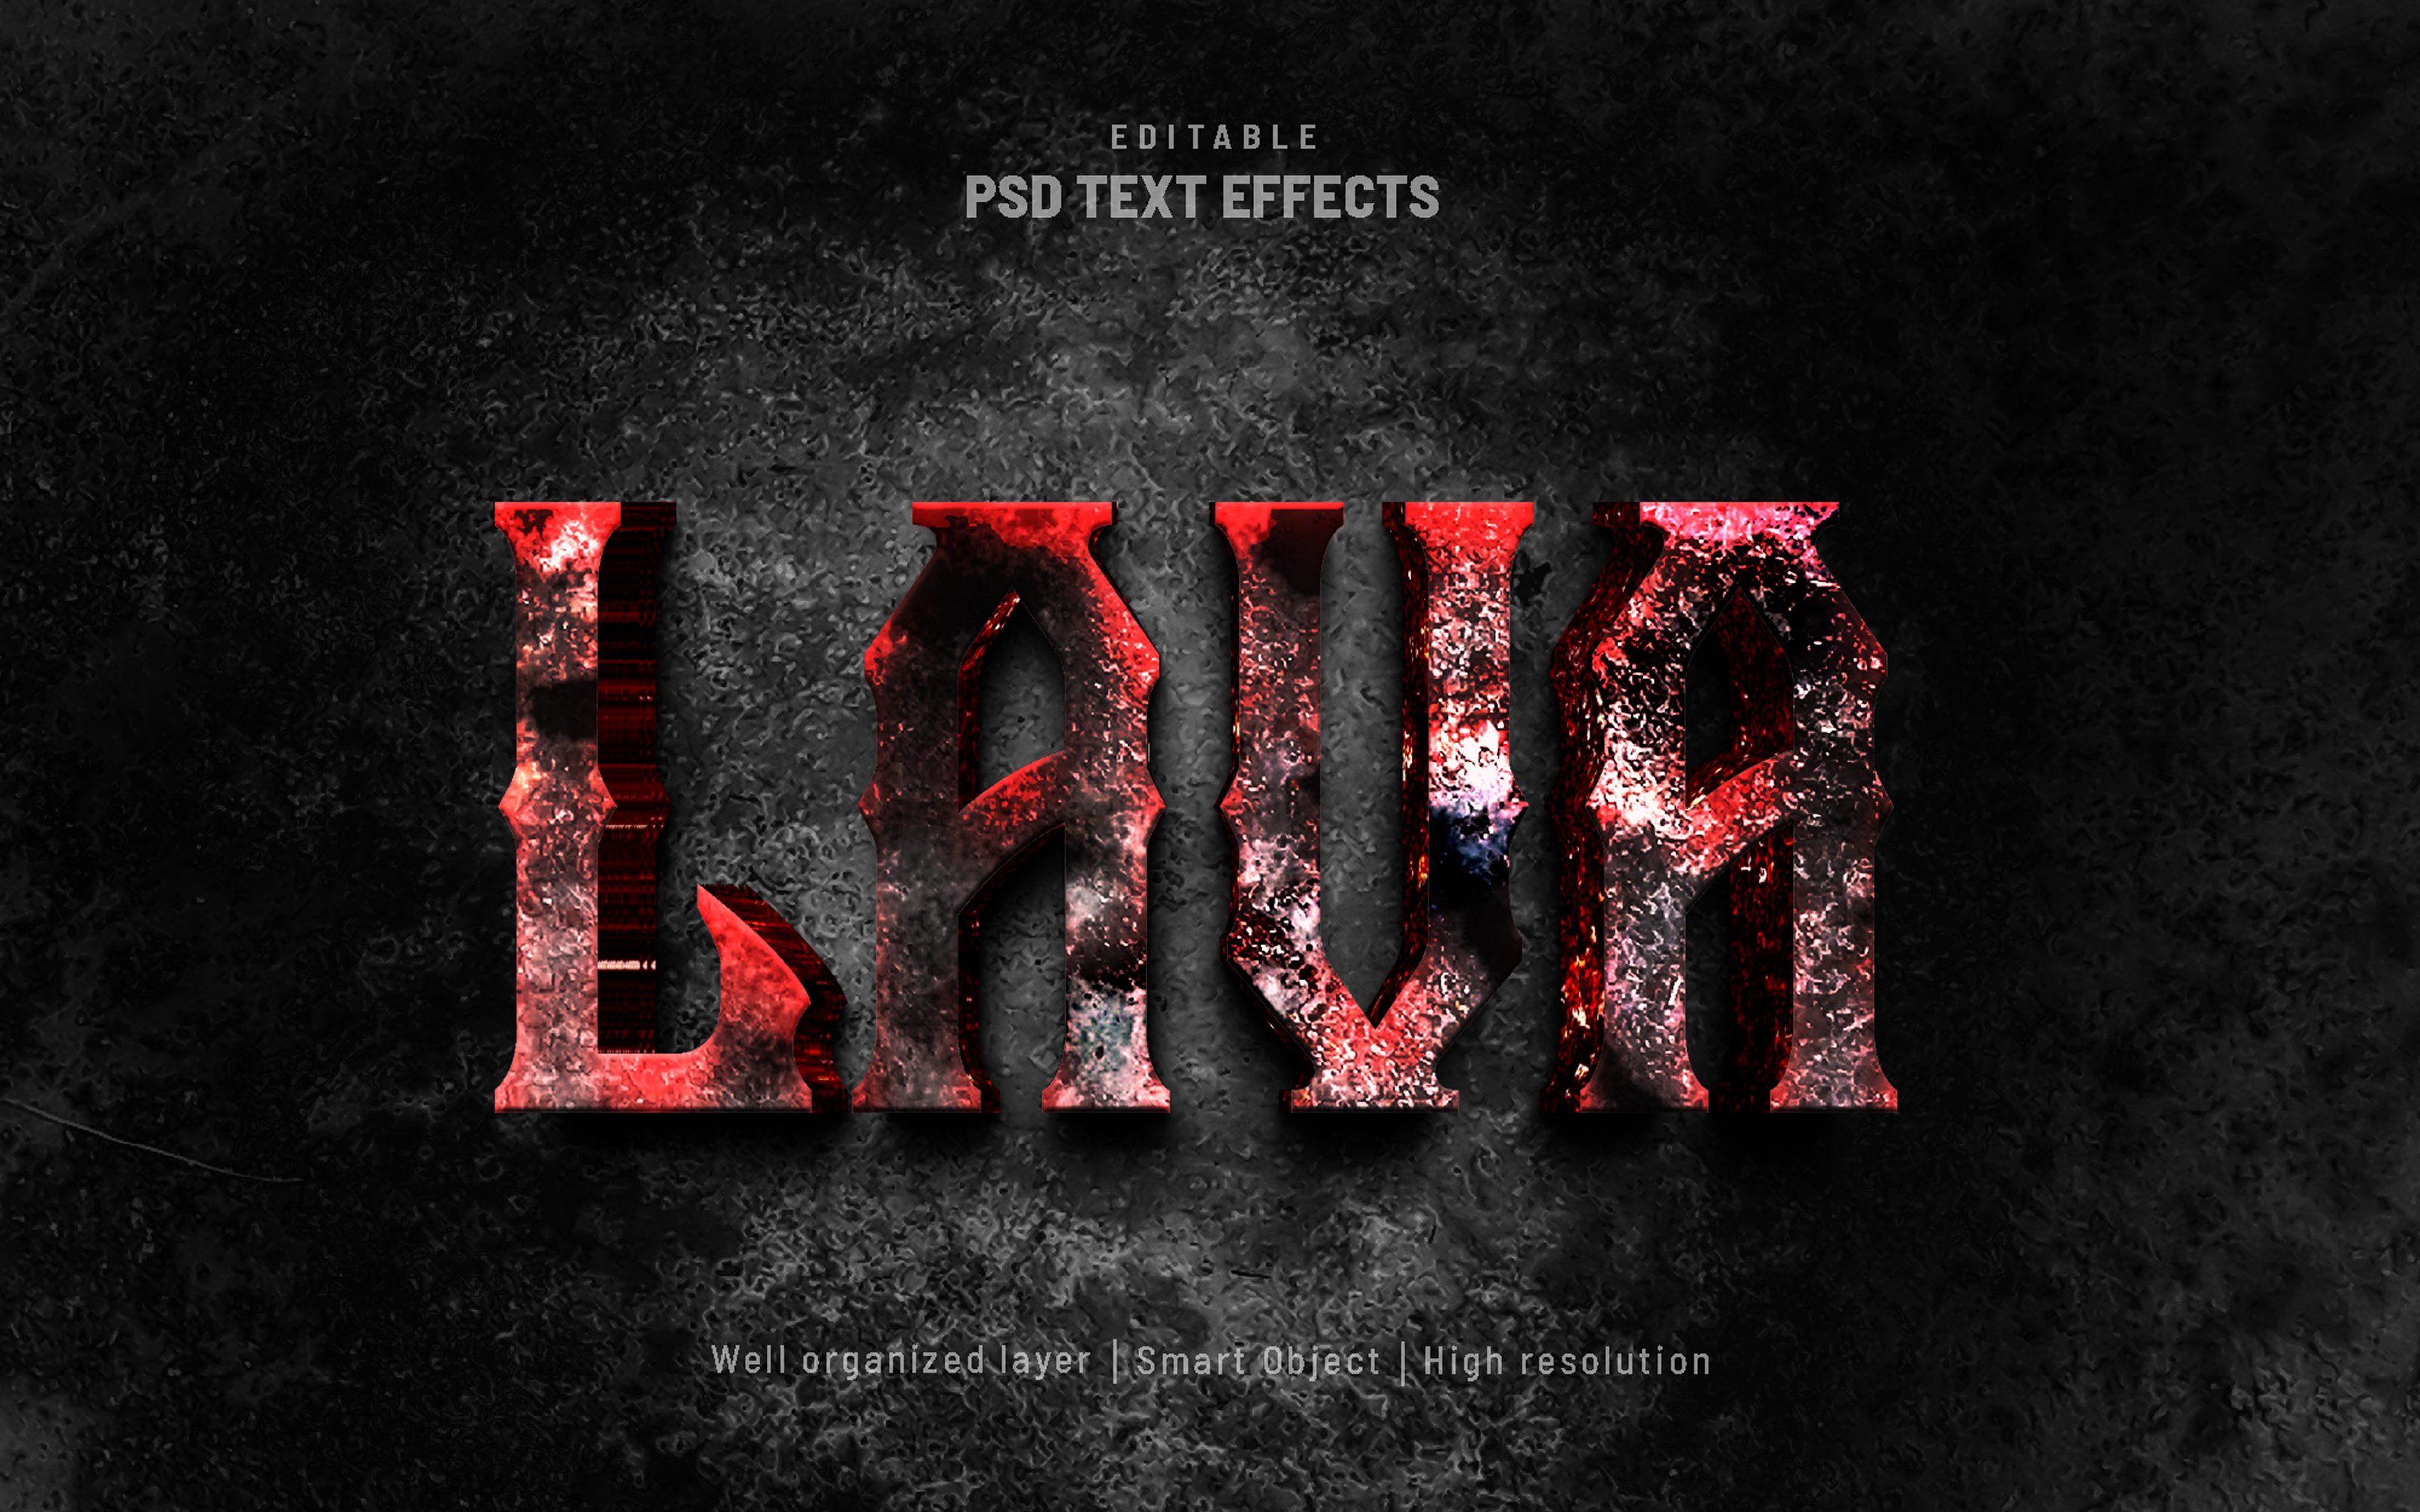 Lava editable text action PSDcover image.